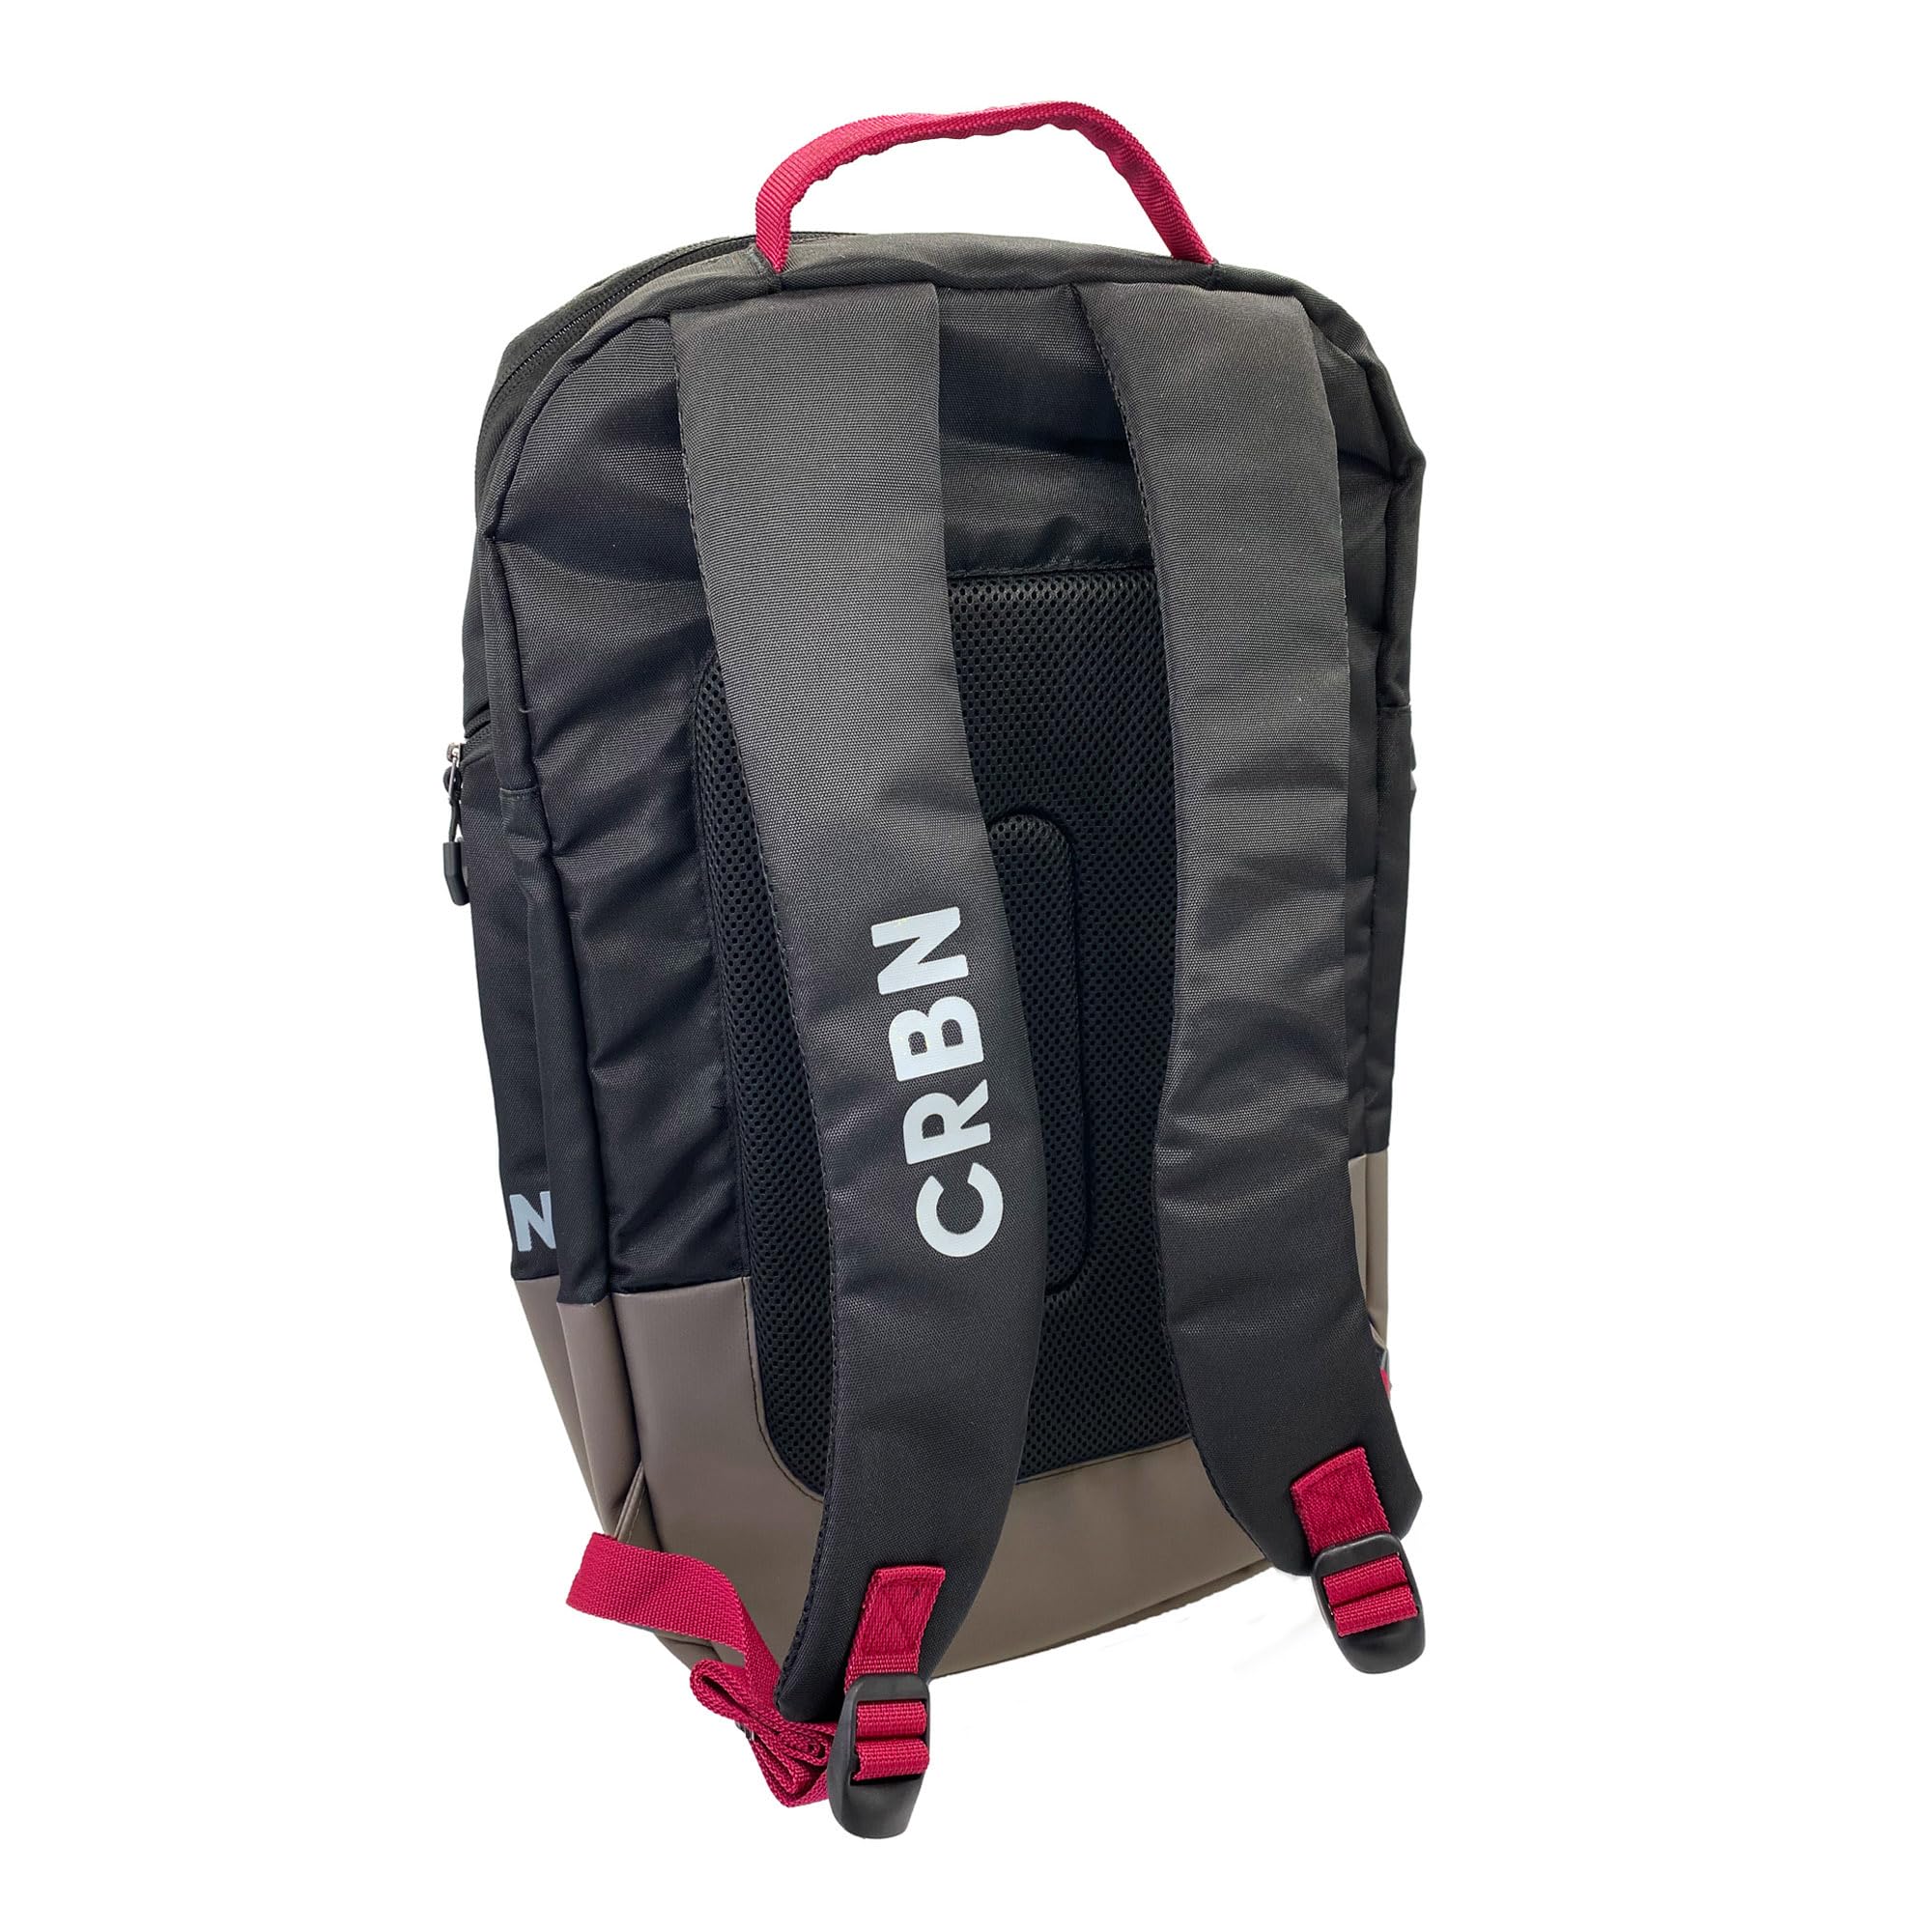 CRBN Pickleball Bags - 3 Paddles, Balls, Shoes & More